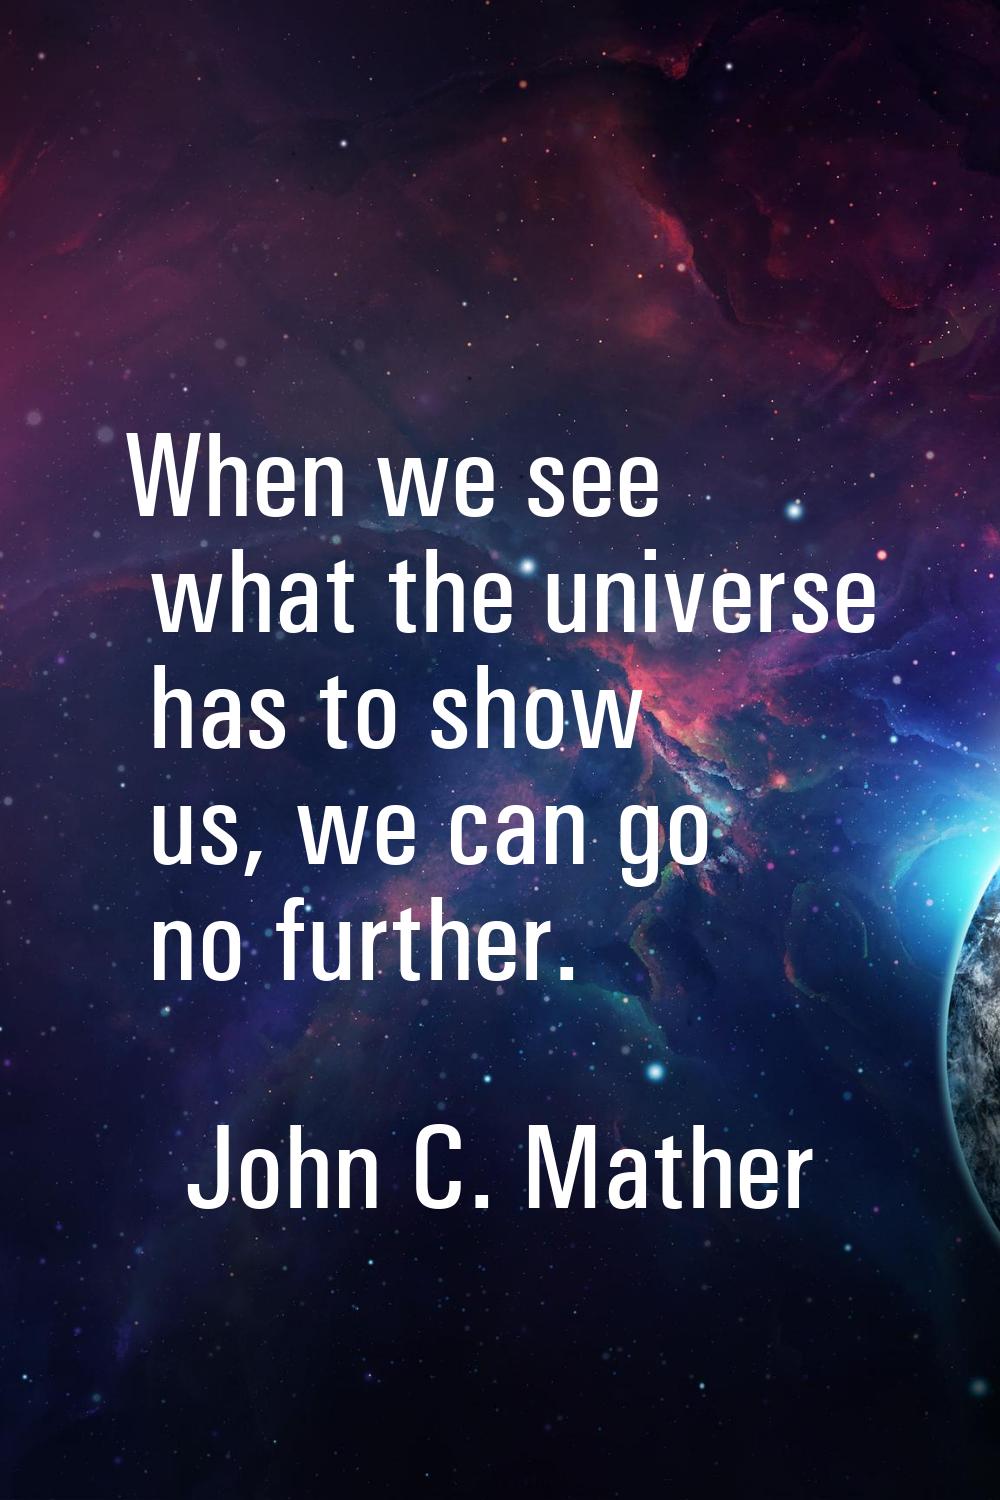 When we see what the universe has to show us, we can go no further.